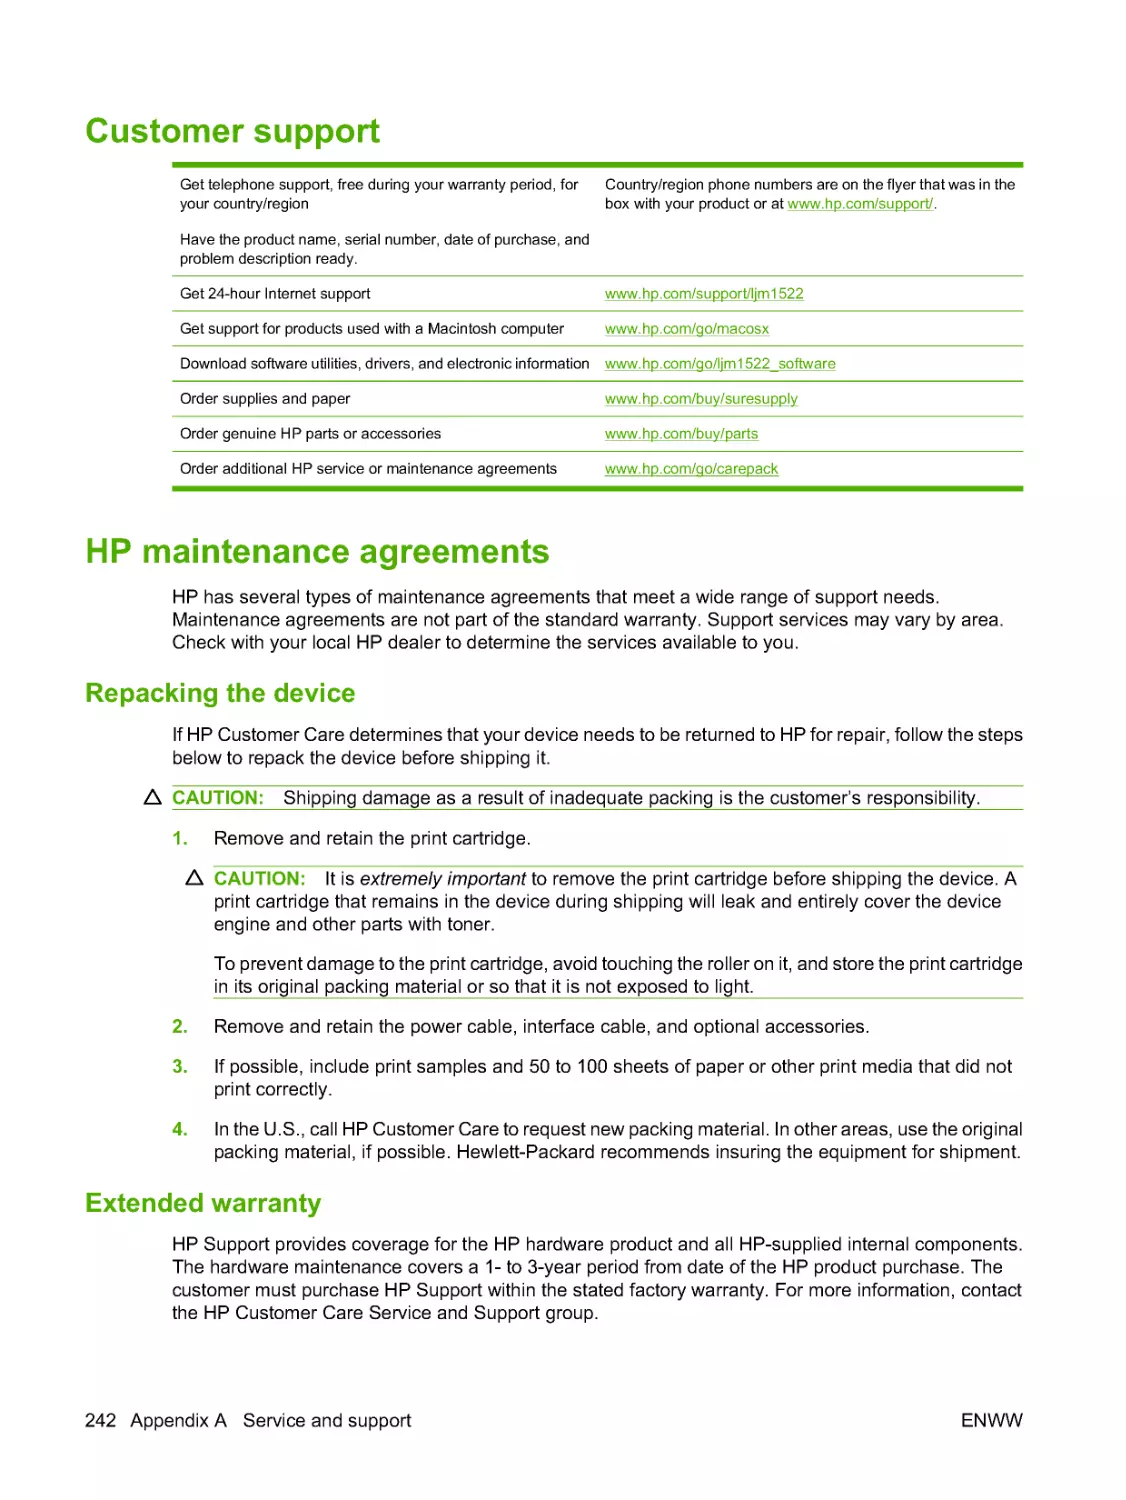 Customer support
HP maintenance agreements
Extended warranty